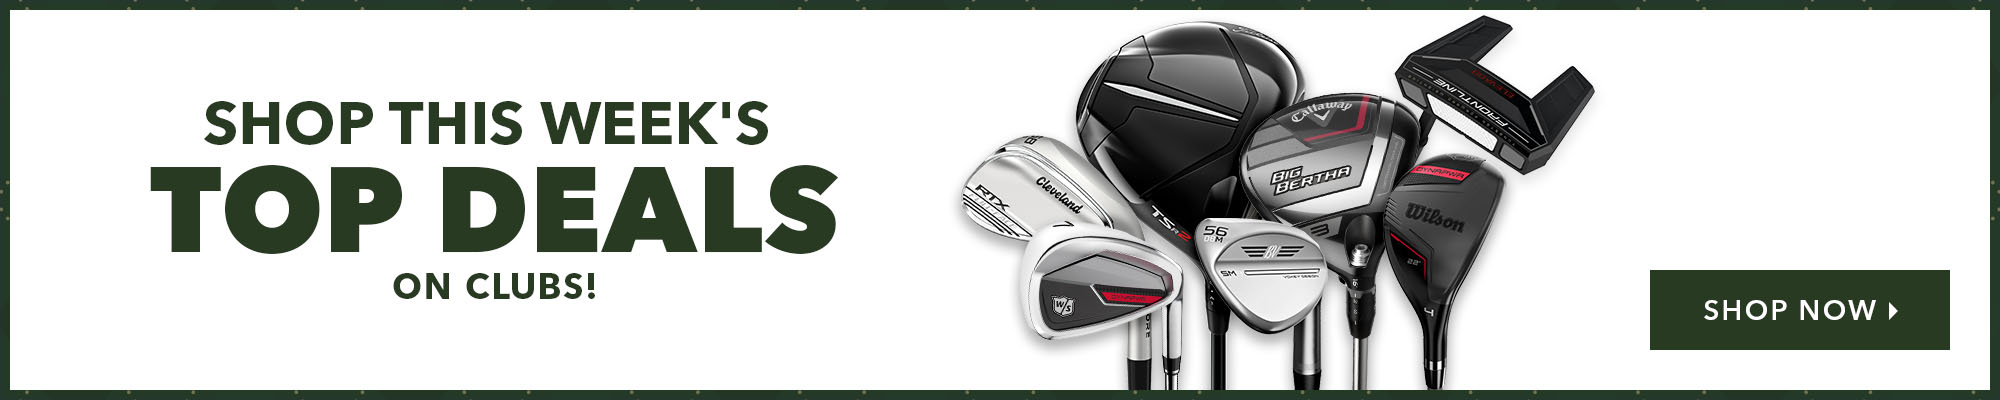 Father's Day Sale - Save Big On Clubs!